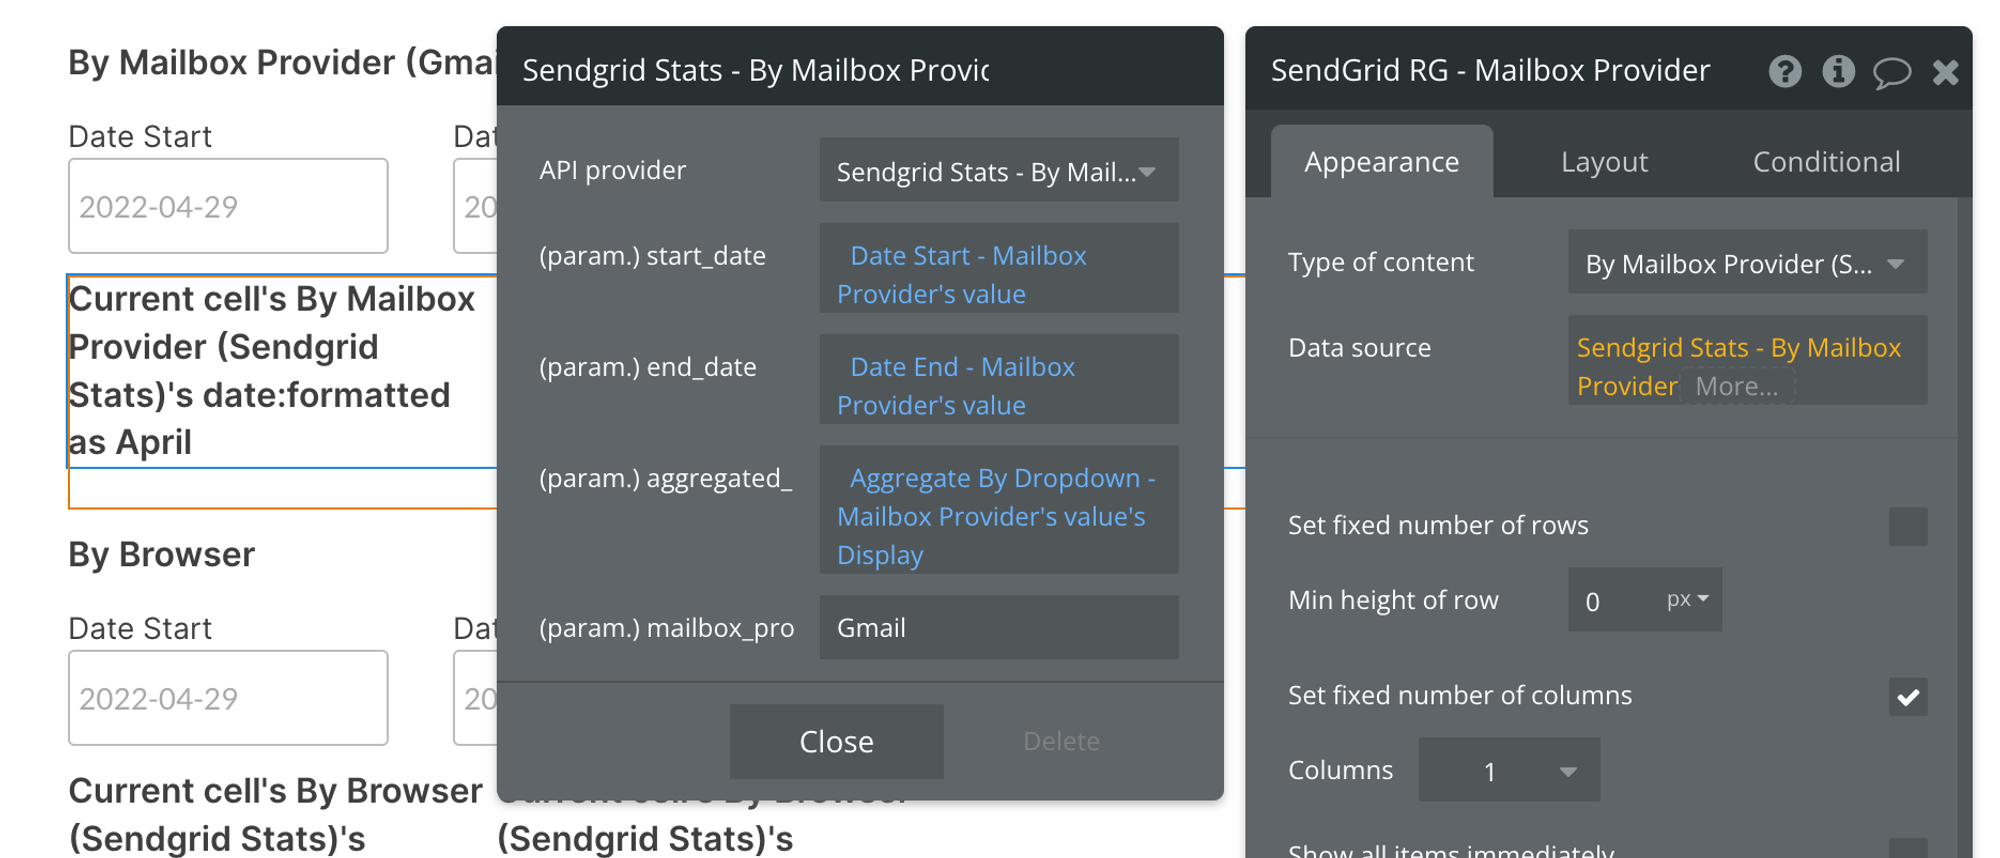 Select Sendgrid Stats - By Mailbox Provider from the API provider dropdown